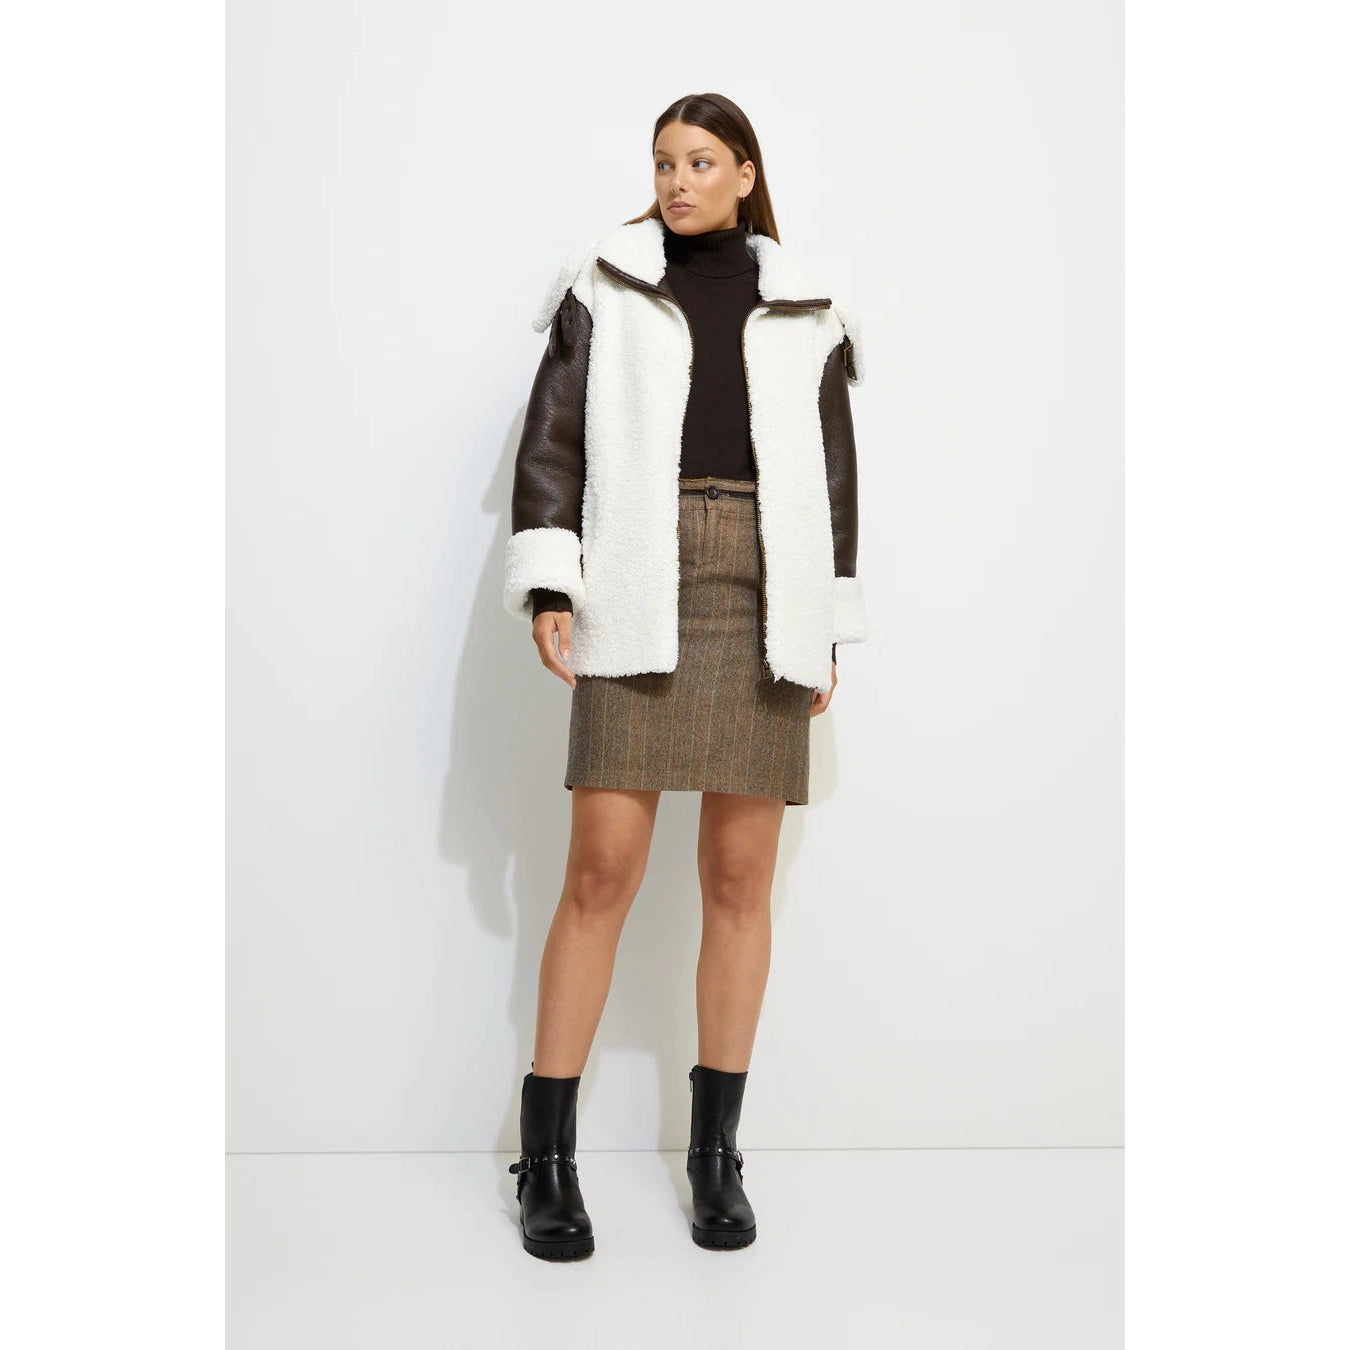 Unreal Fur Symbiosis Jacket - Chocolate and White  Unreal Fur Pisces Boutique